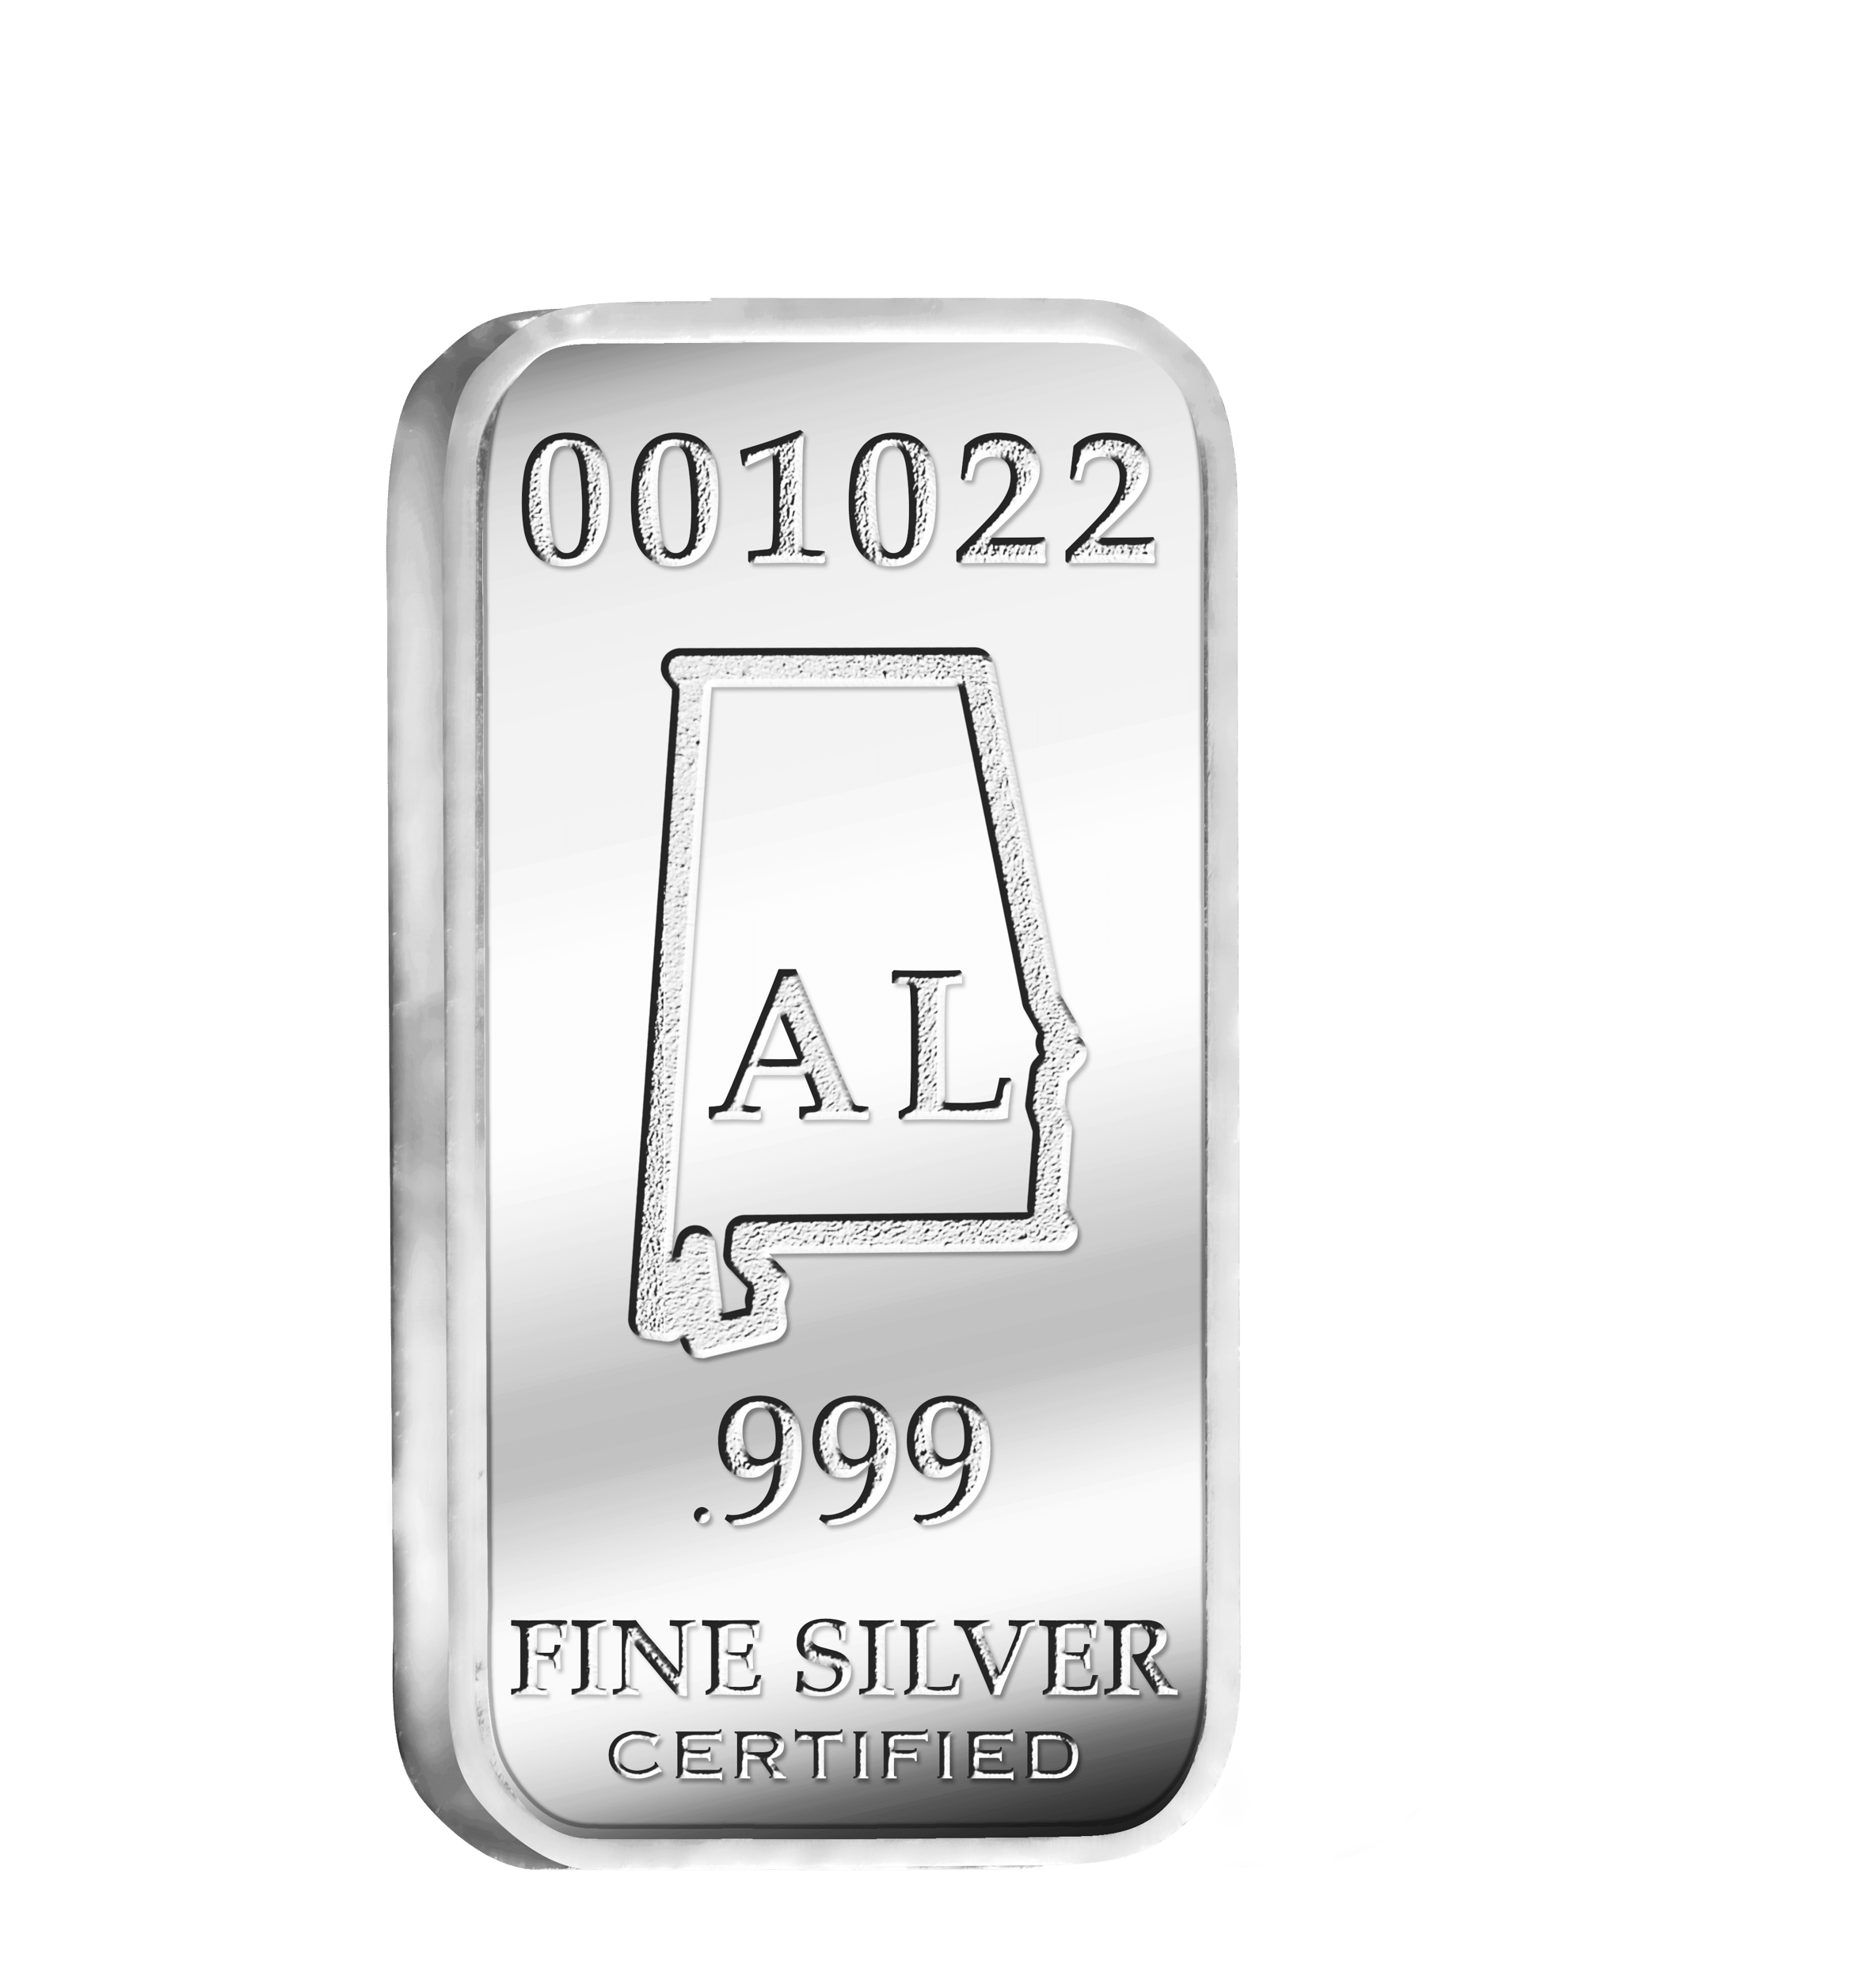 Inflation Nation by STL Mint, 1oz .999 Silver Proof Bar